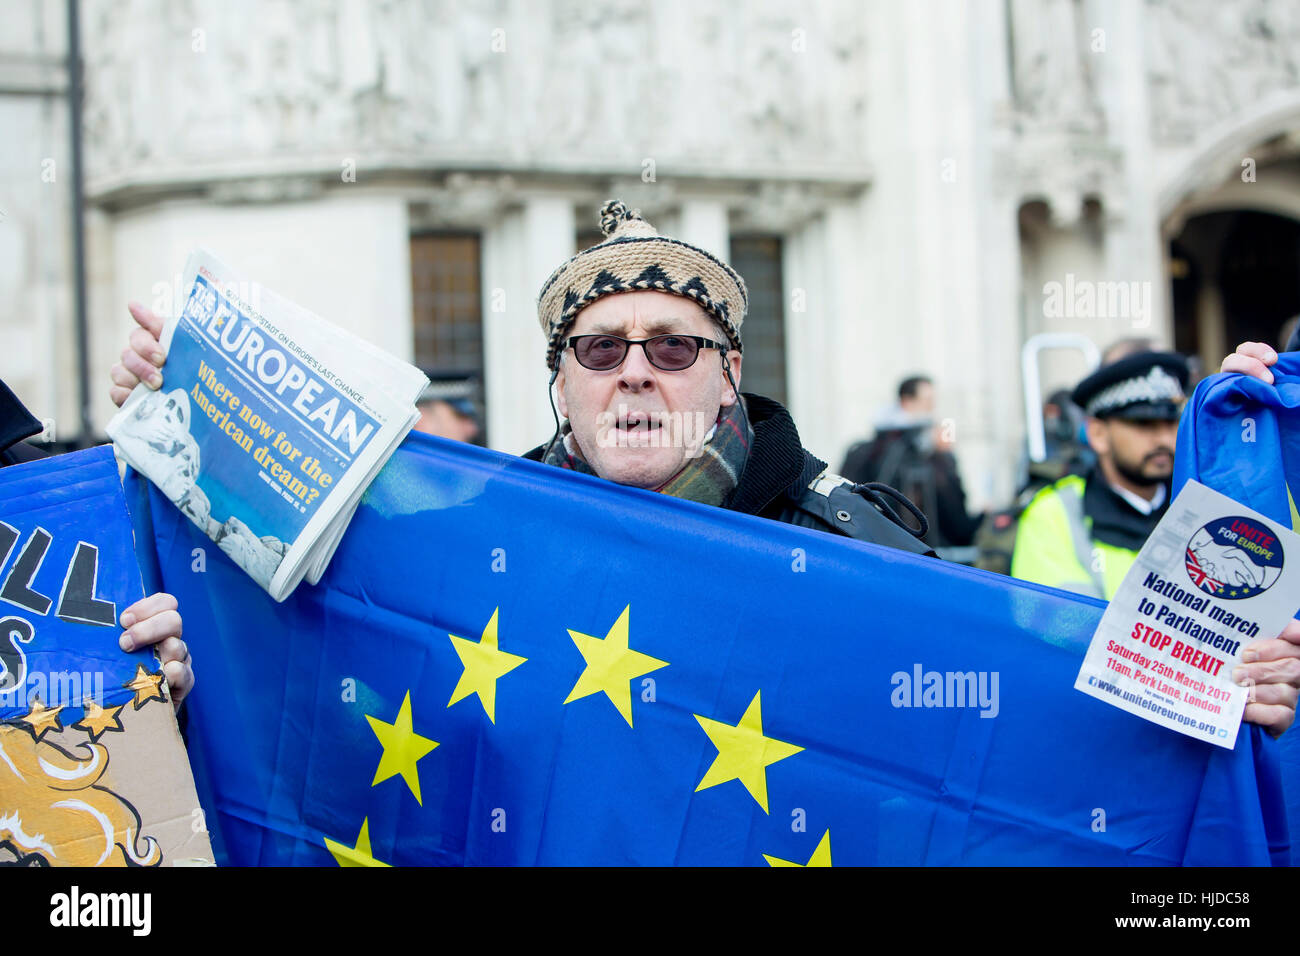 London, UK. 24th Jan, 2017. Verdict of the Supreme Court. The verdict of the Supreme Court was given today. Remain supporters waited outside the court for the announcement. Credit: Jane Campbell/Alamy Live News Stock Photo